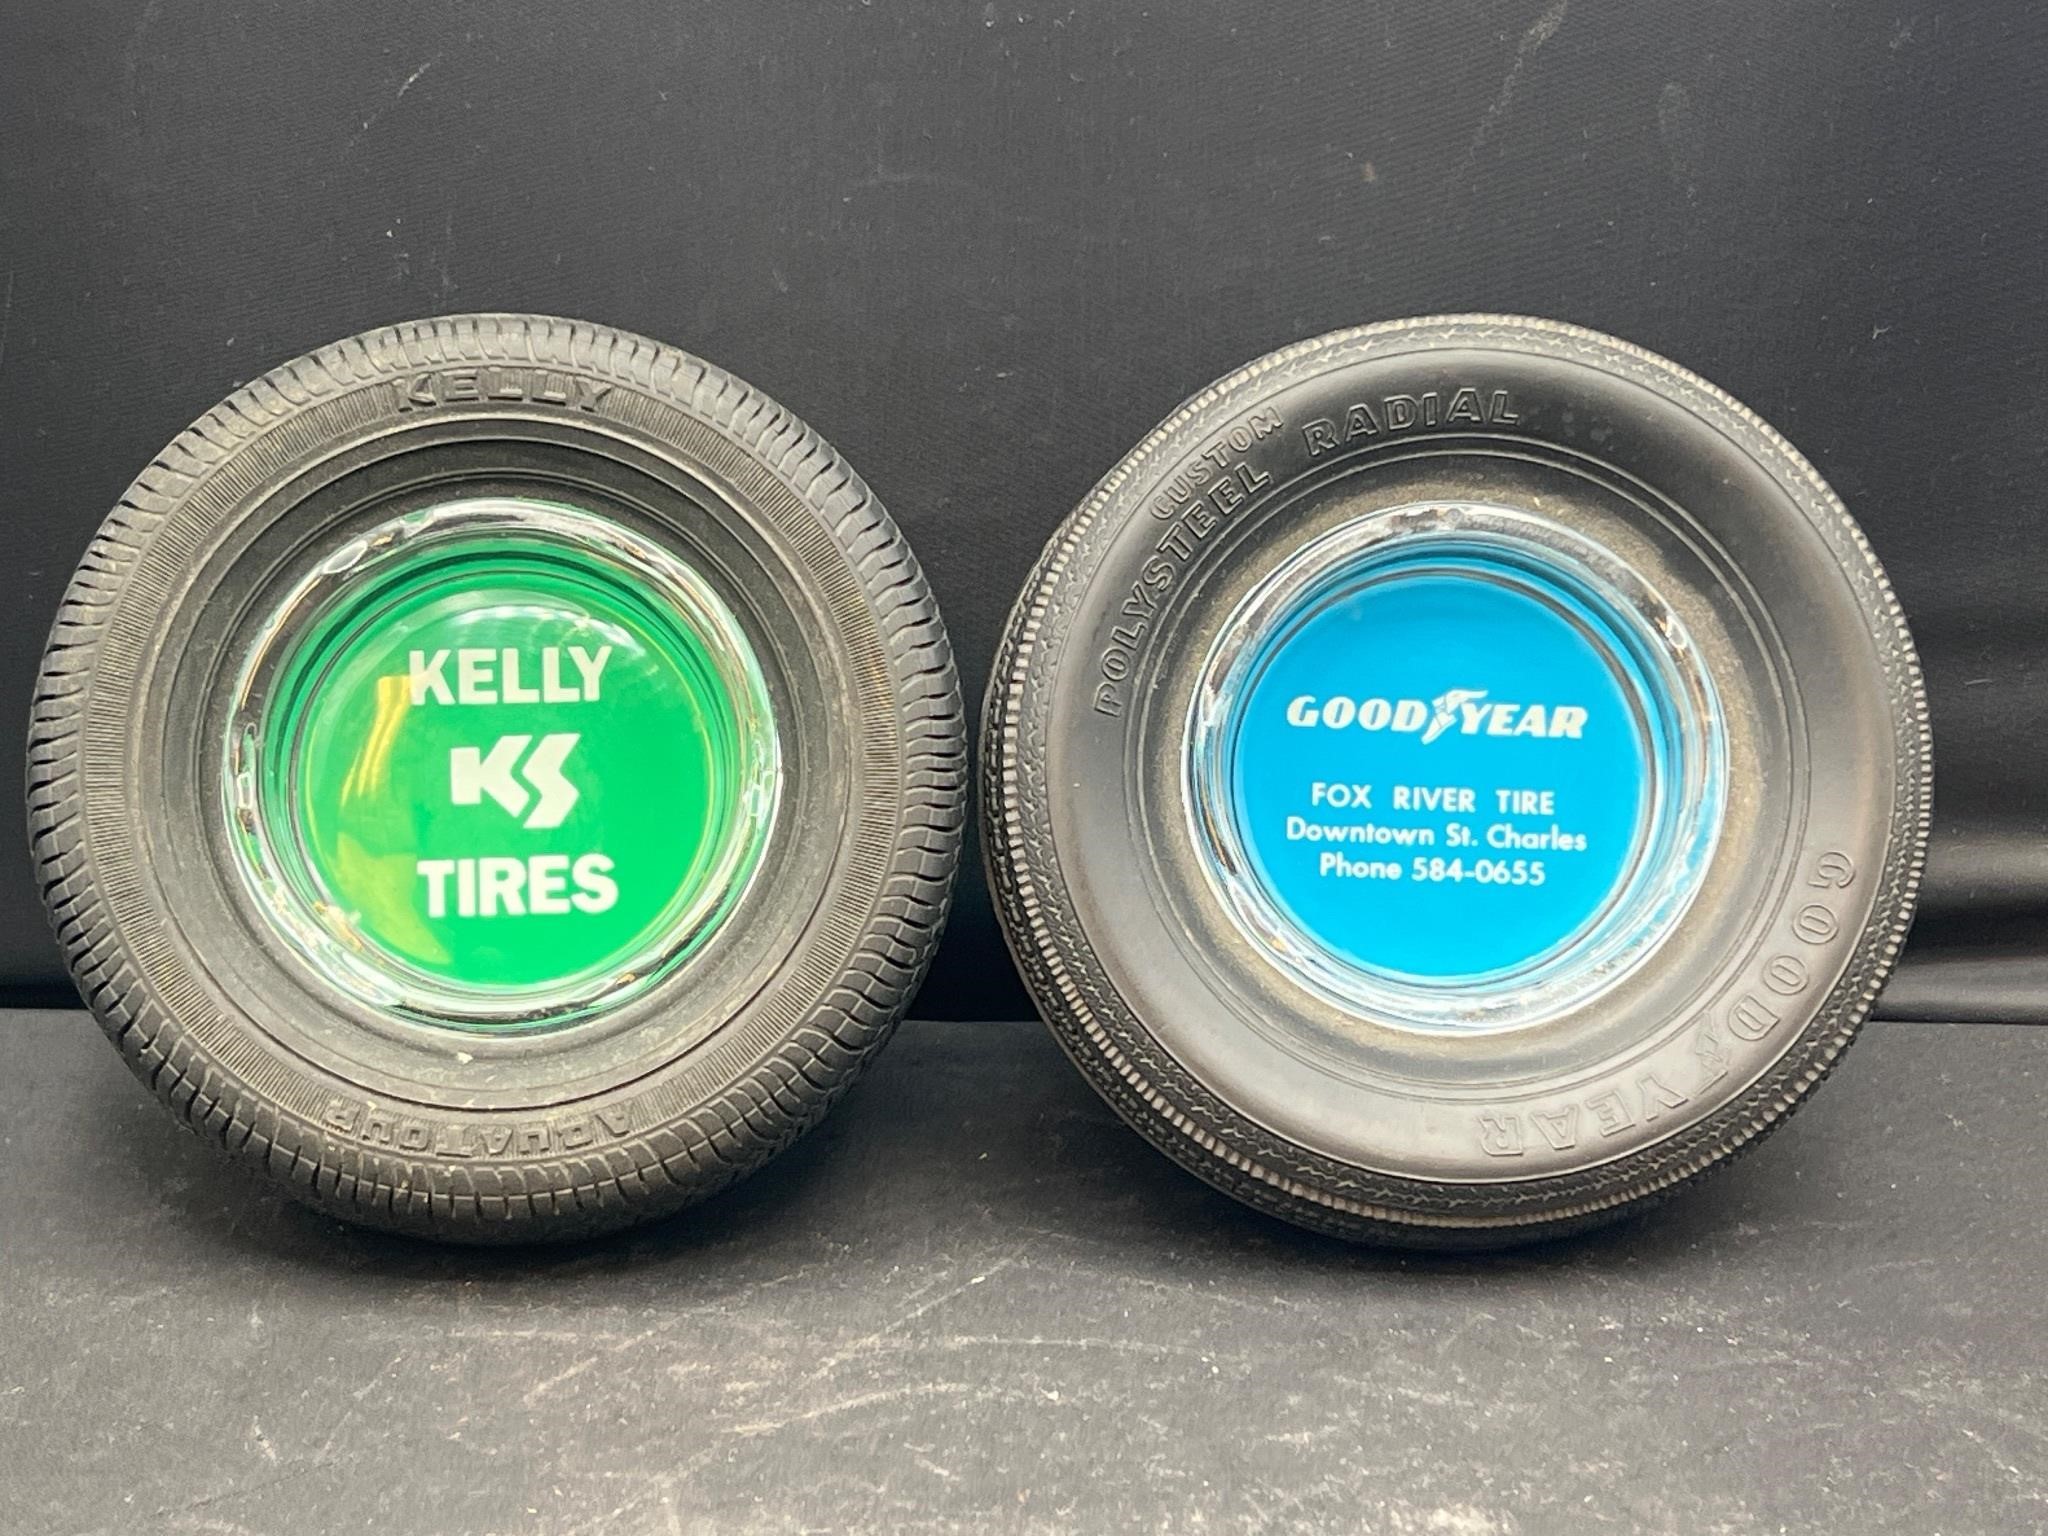 Vintage Kelly tires and Goodyear tire ashtrays